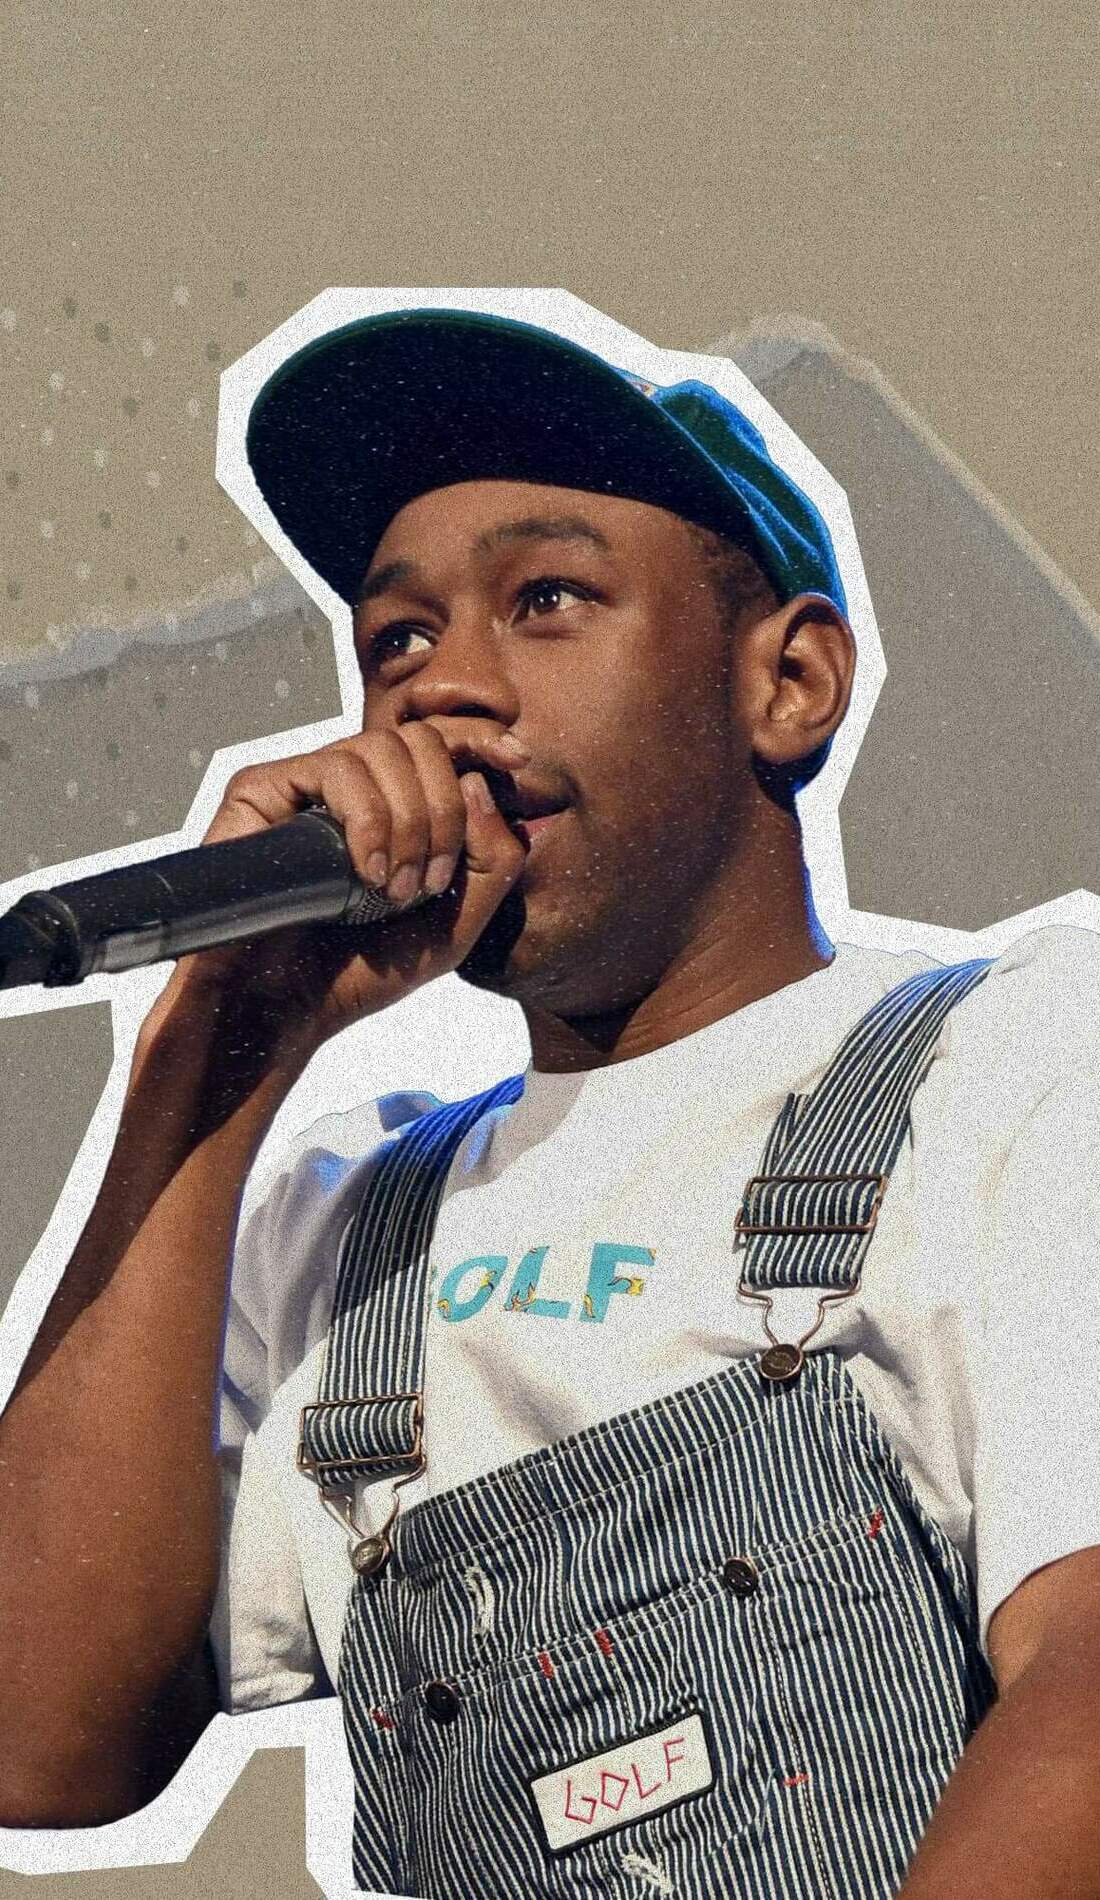 A Tyler, The Creator live event